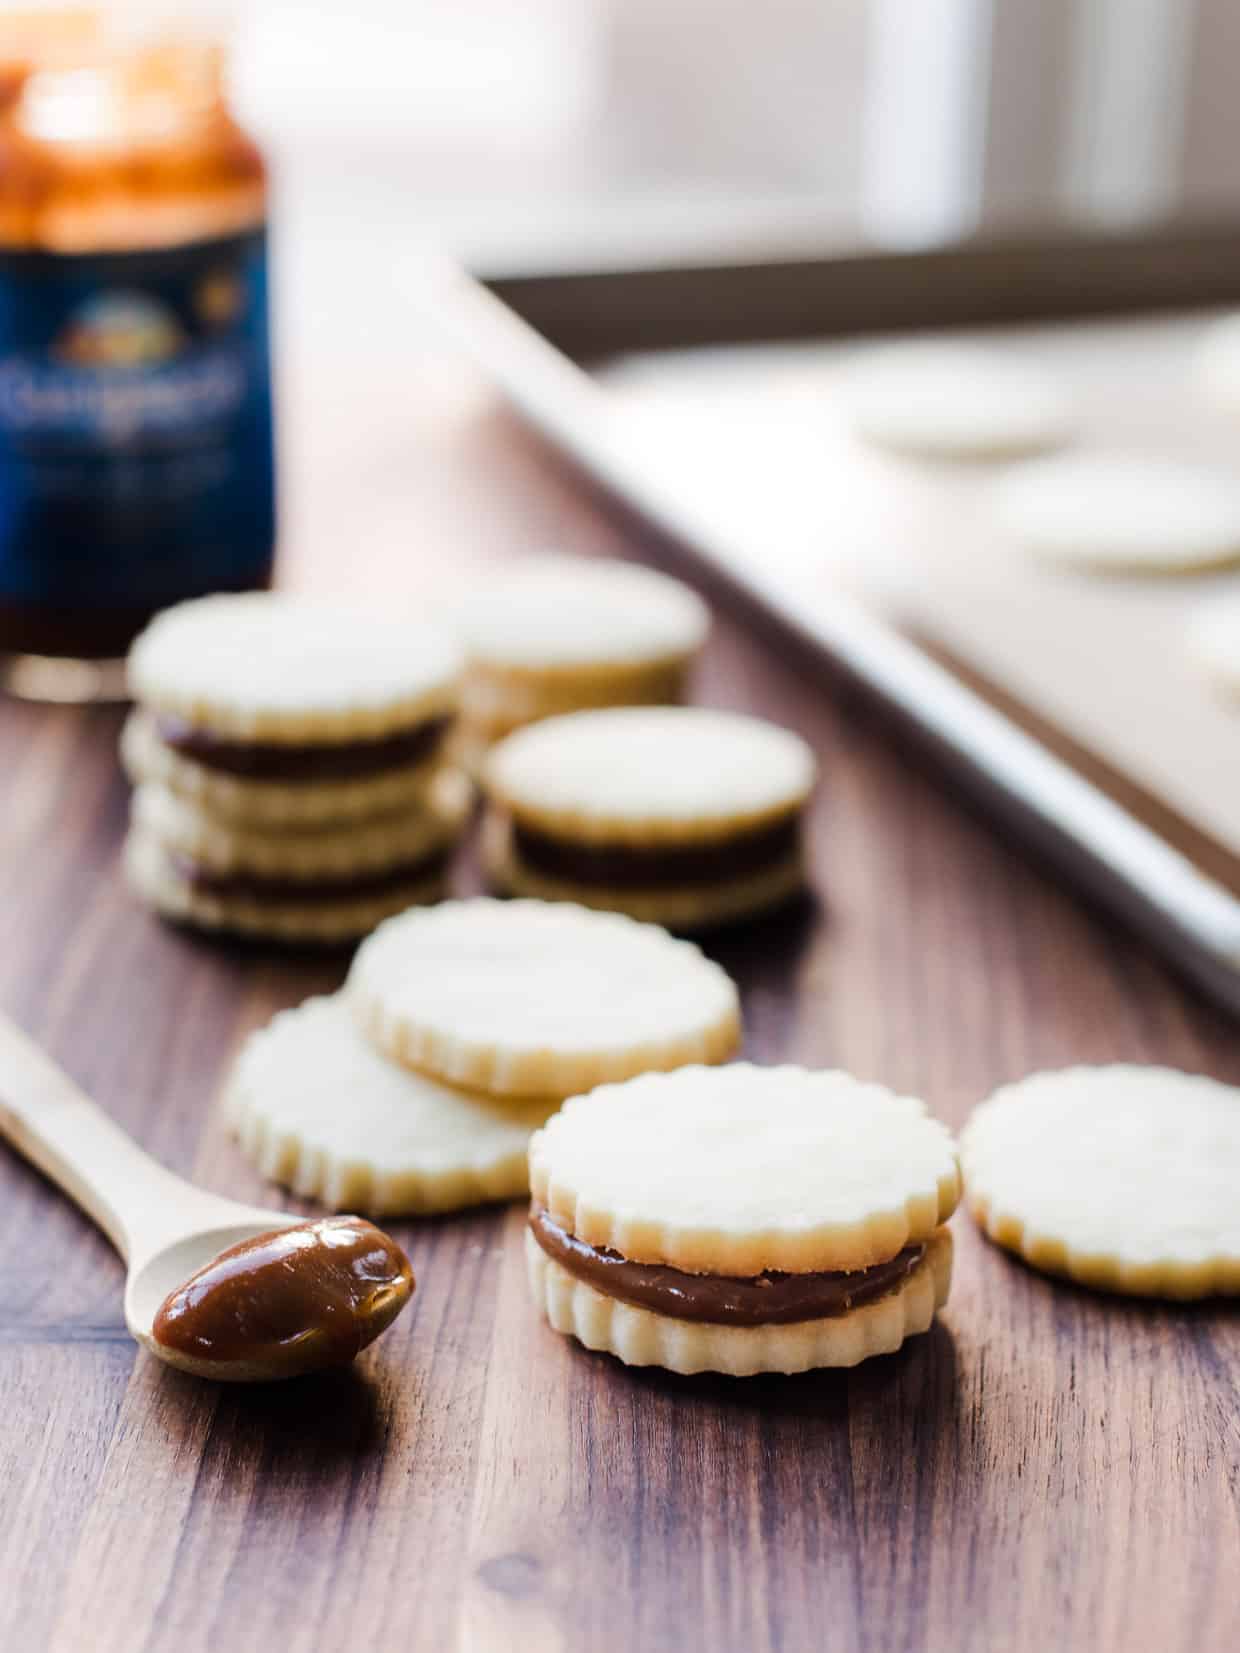 Spoon filled with dulce de leche surrounded by Alfajores cookies.